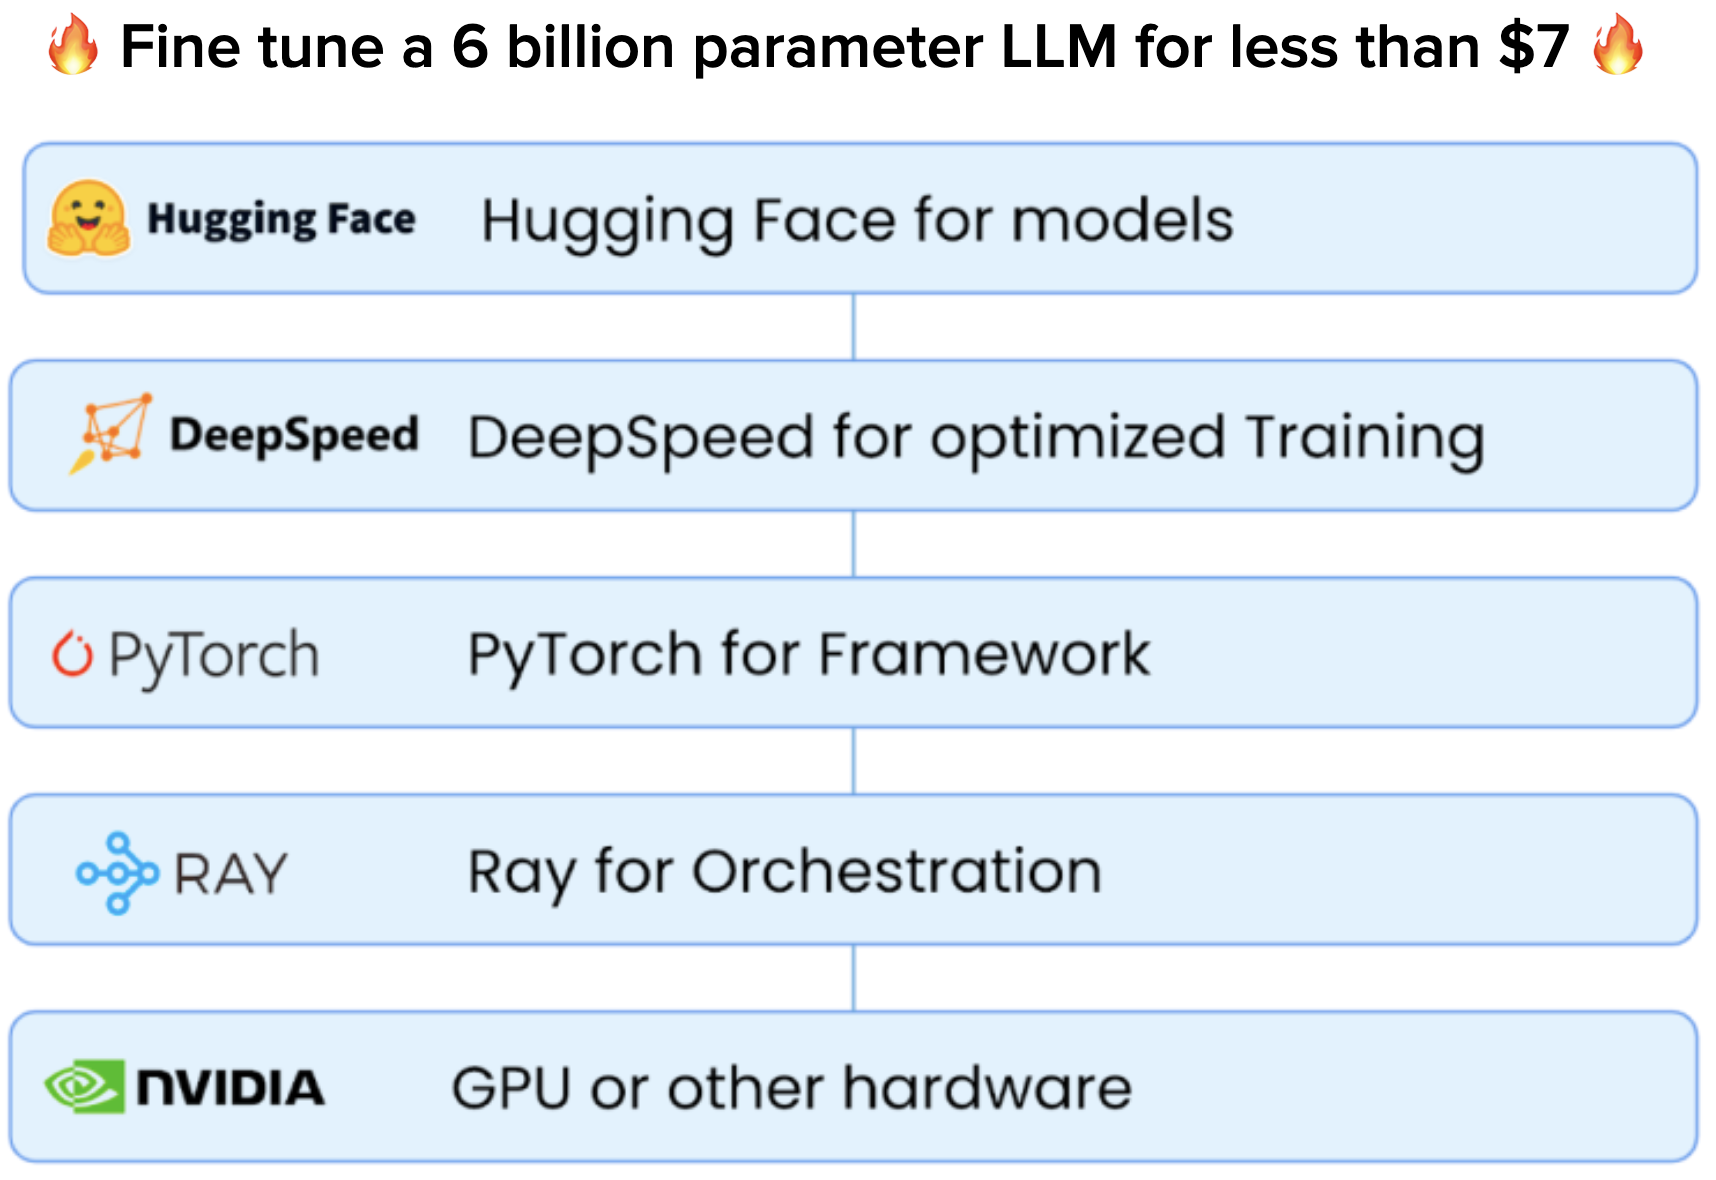 How to Fine-Tune a 6 Billion Parameter LLM for Less Than $7